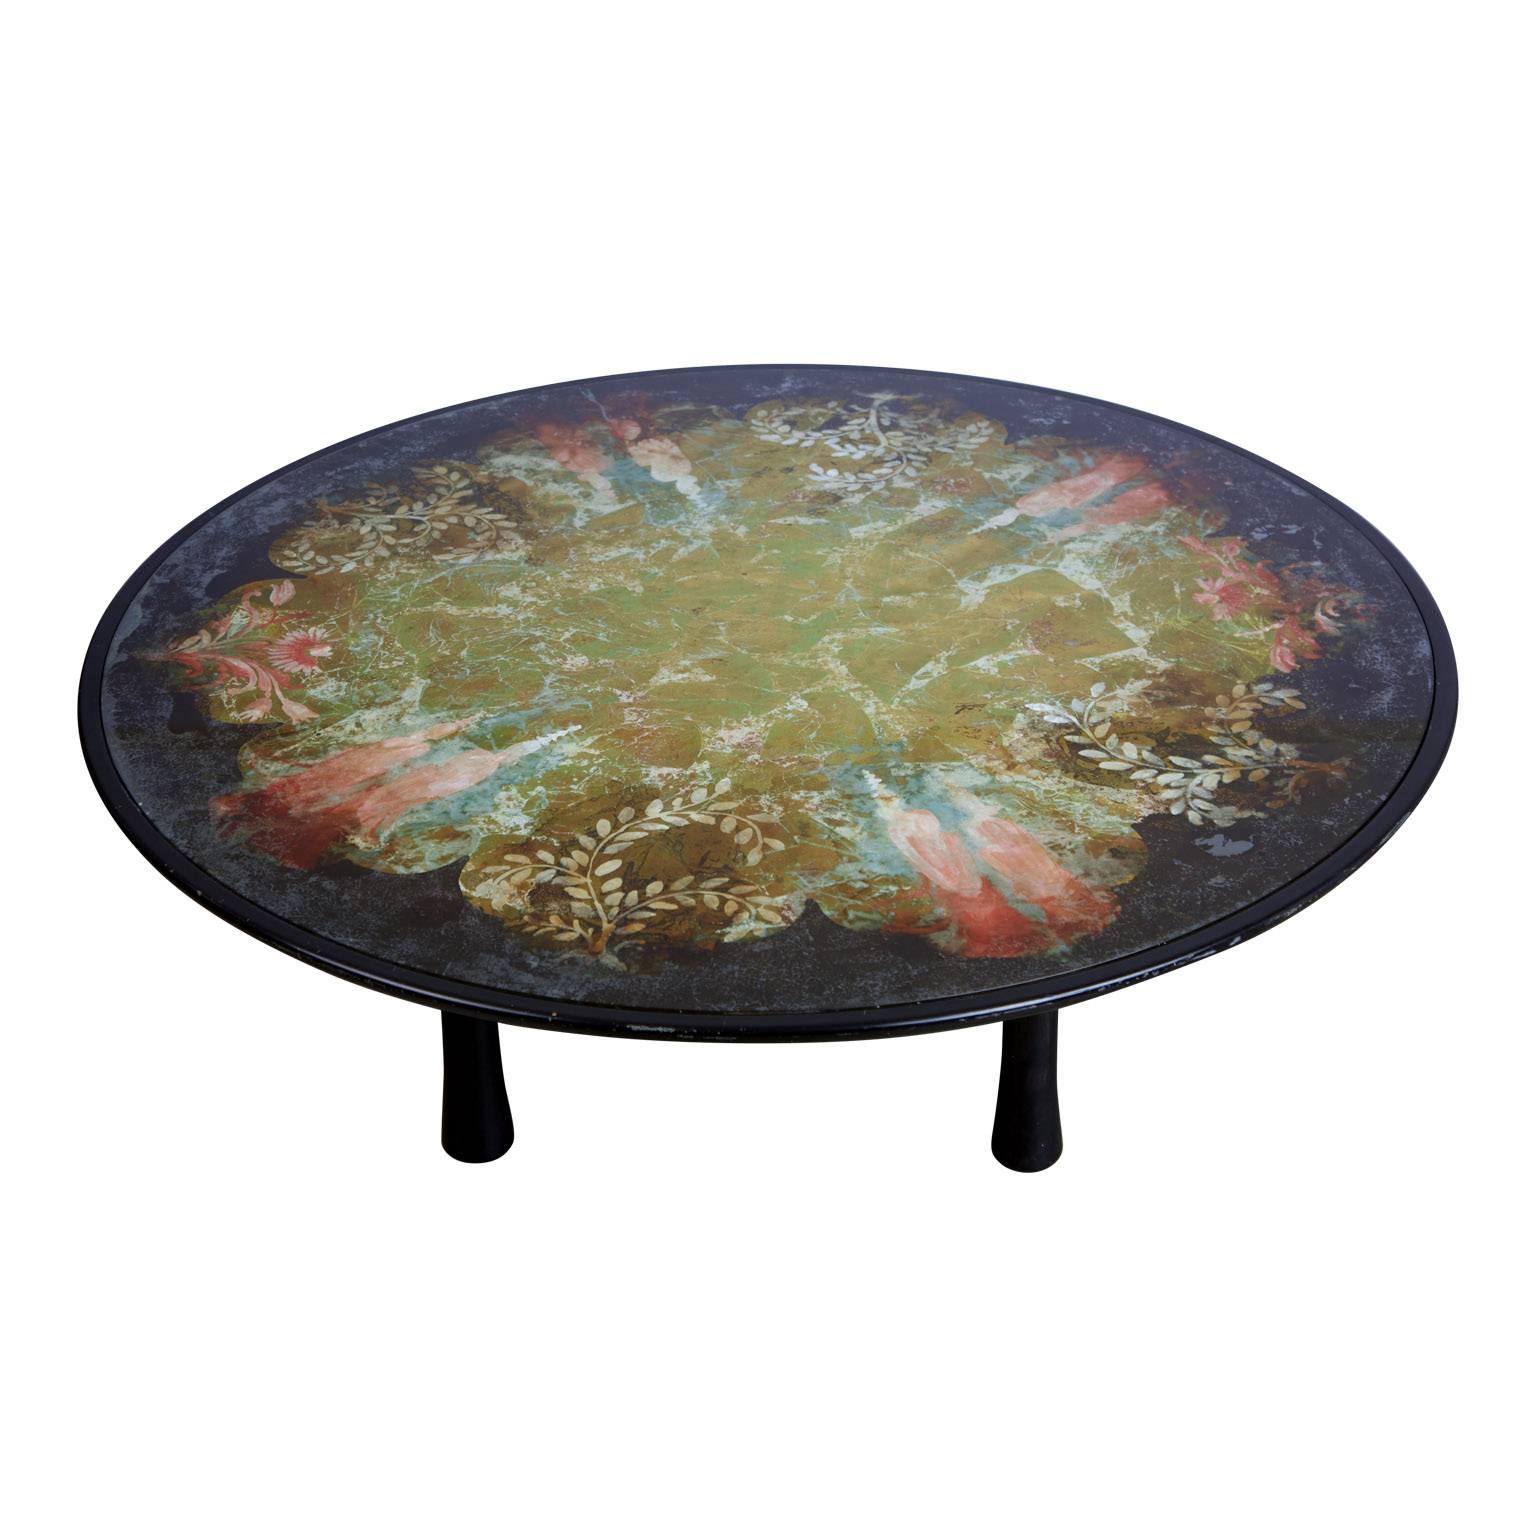 Extensively detailed, large and expansive Scandinavian verre églomisé coffee table supported by sculptural legs. The églomisé design is made applied onto the rear face of glass to produce a mirror finish. This includes an infusion of colors